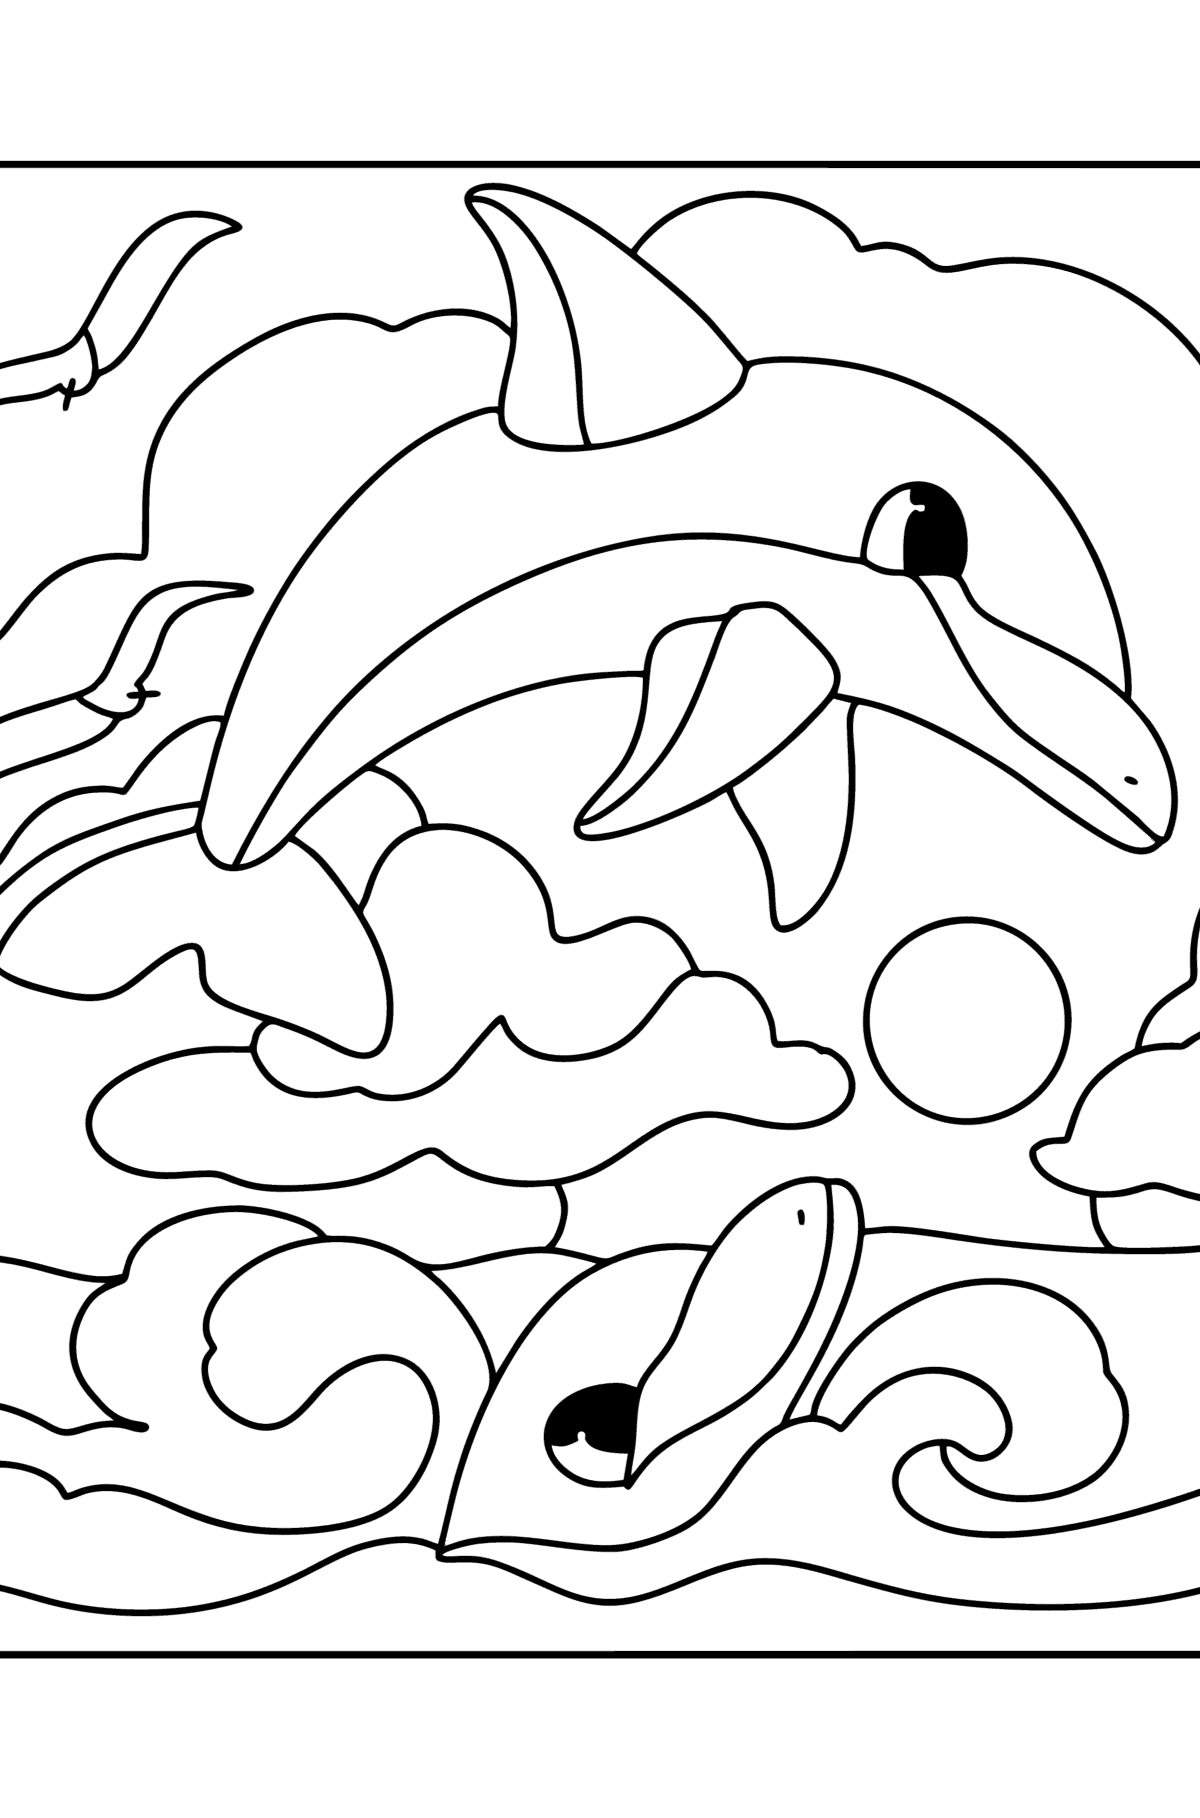 Dolphins coloring page - Coloring Pages for Kids